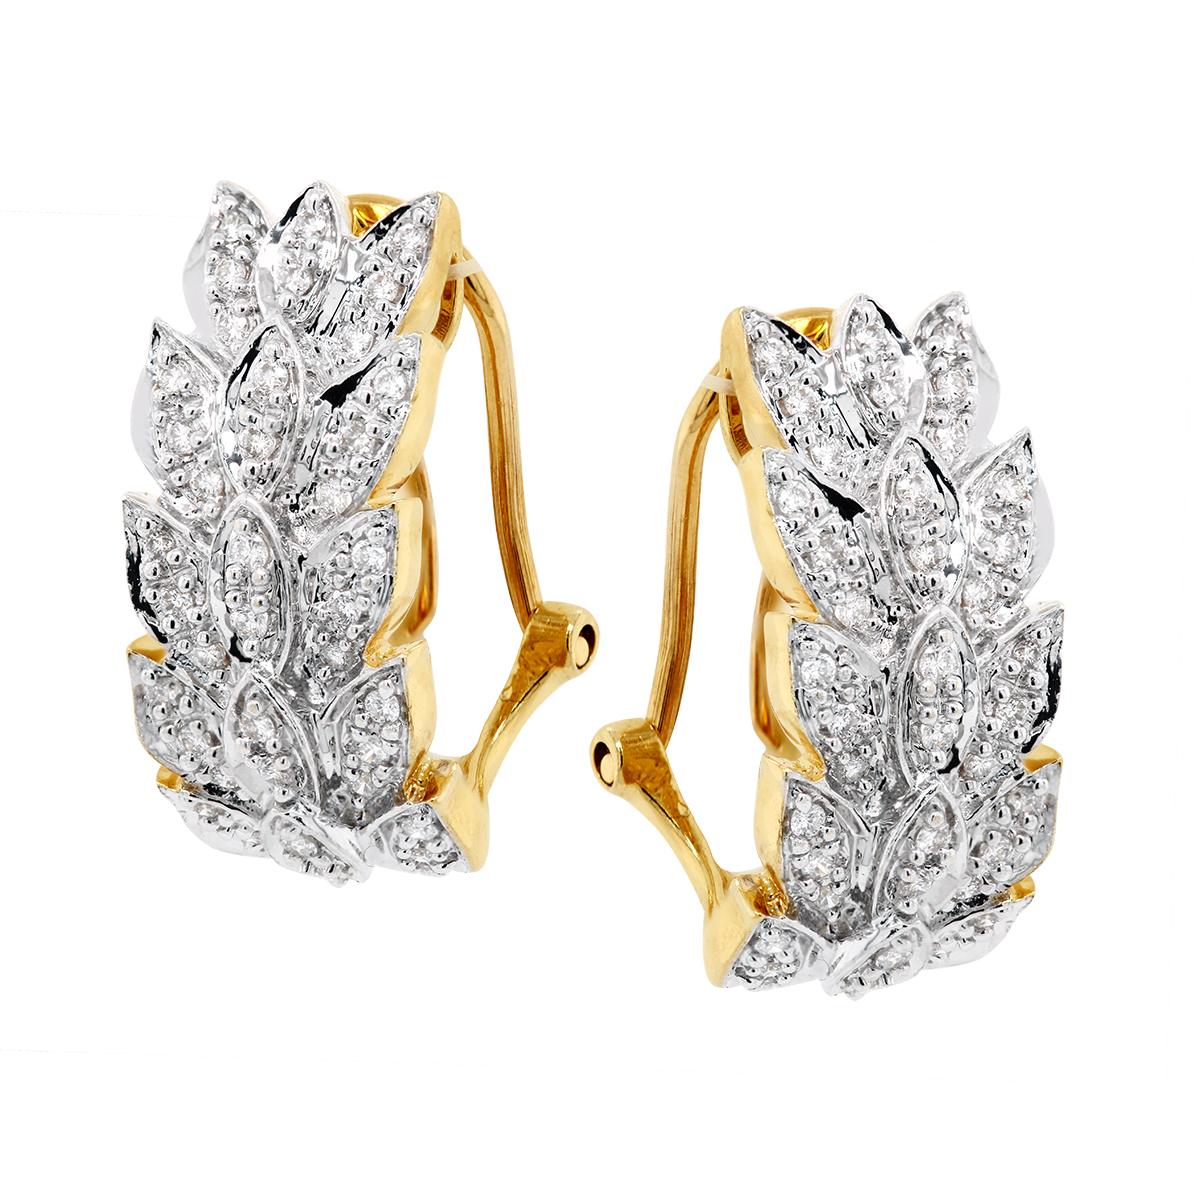 TWO-TONE GOLD DIAMOND HOOP EARRINGS WITH LEAF DESIGN, 1/2 CT TW - Howard\'s  Jewelry Center